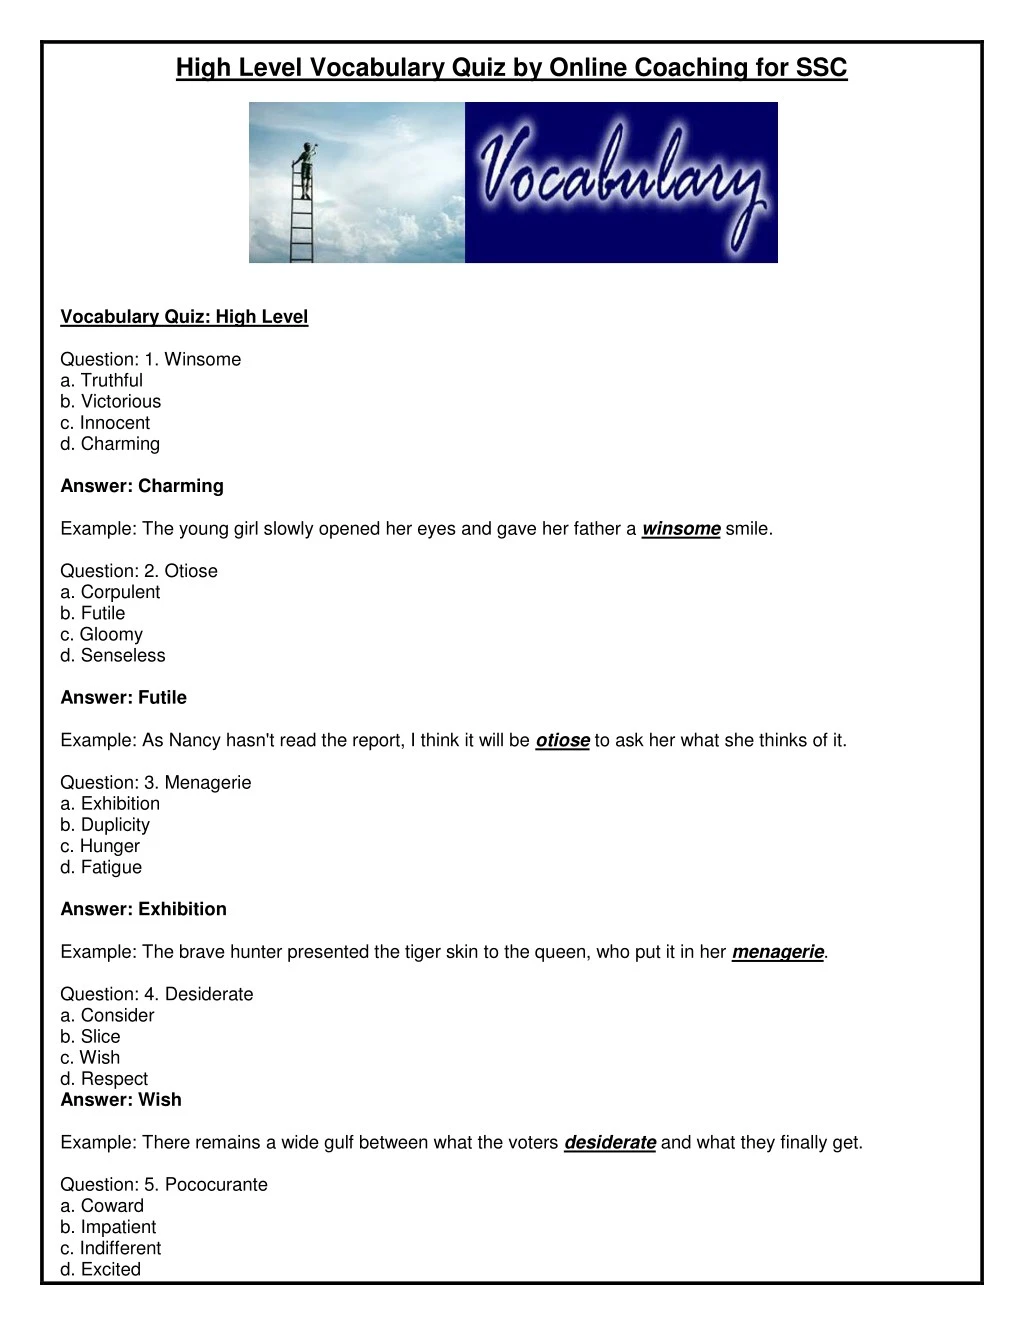 high level vocabulary quiz by online coaching